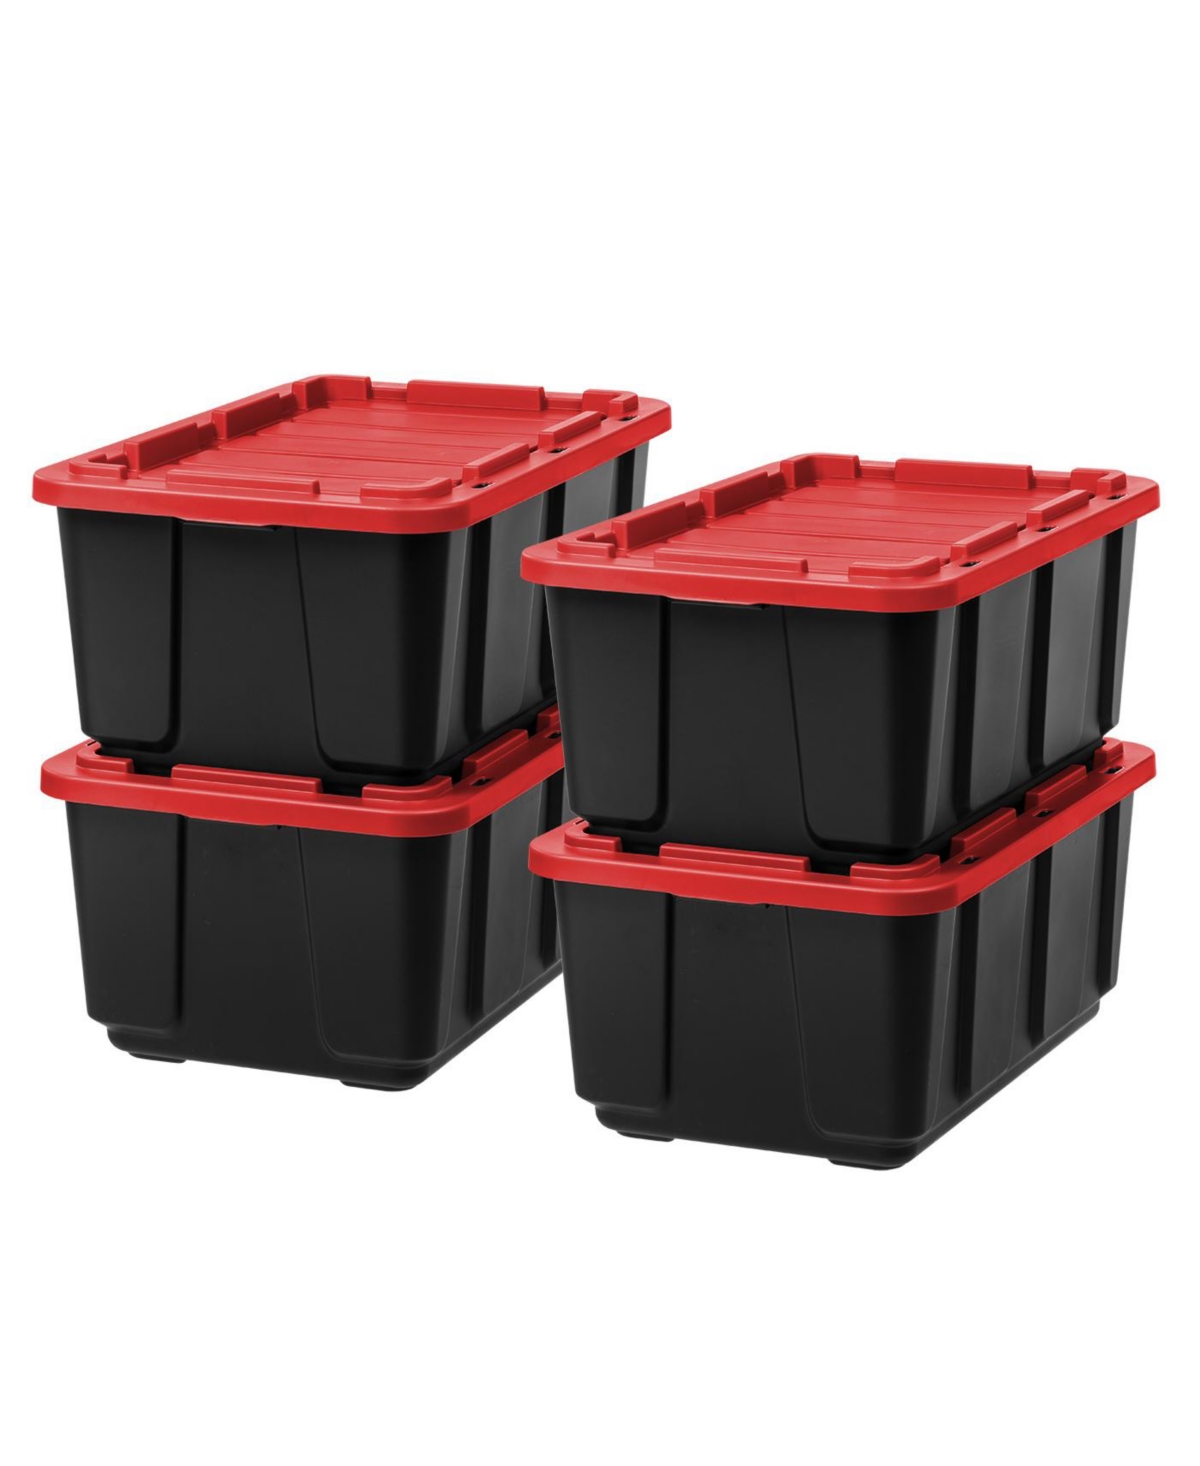 27Gal/108Qt 4 Pack Large Heavy-Duty Storage Plastic Bin Tote Organizing Container with Durable Lid, Black/Red - Black